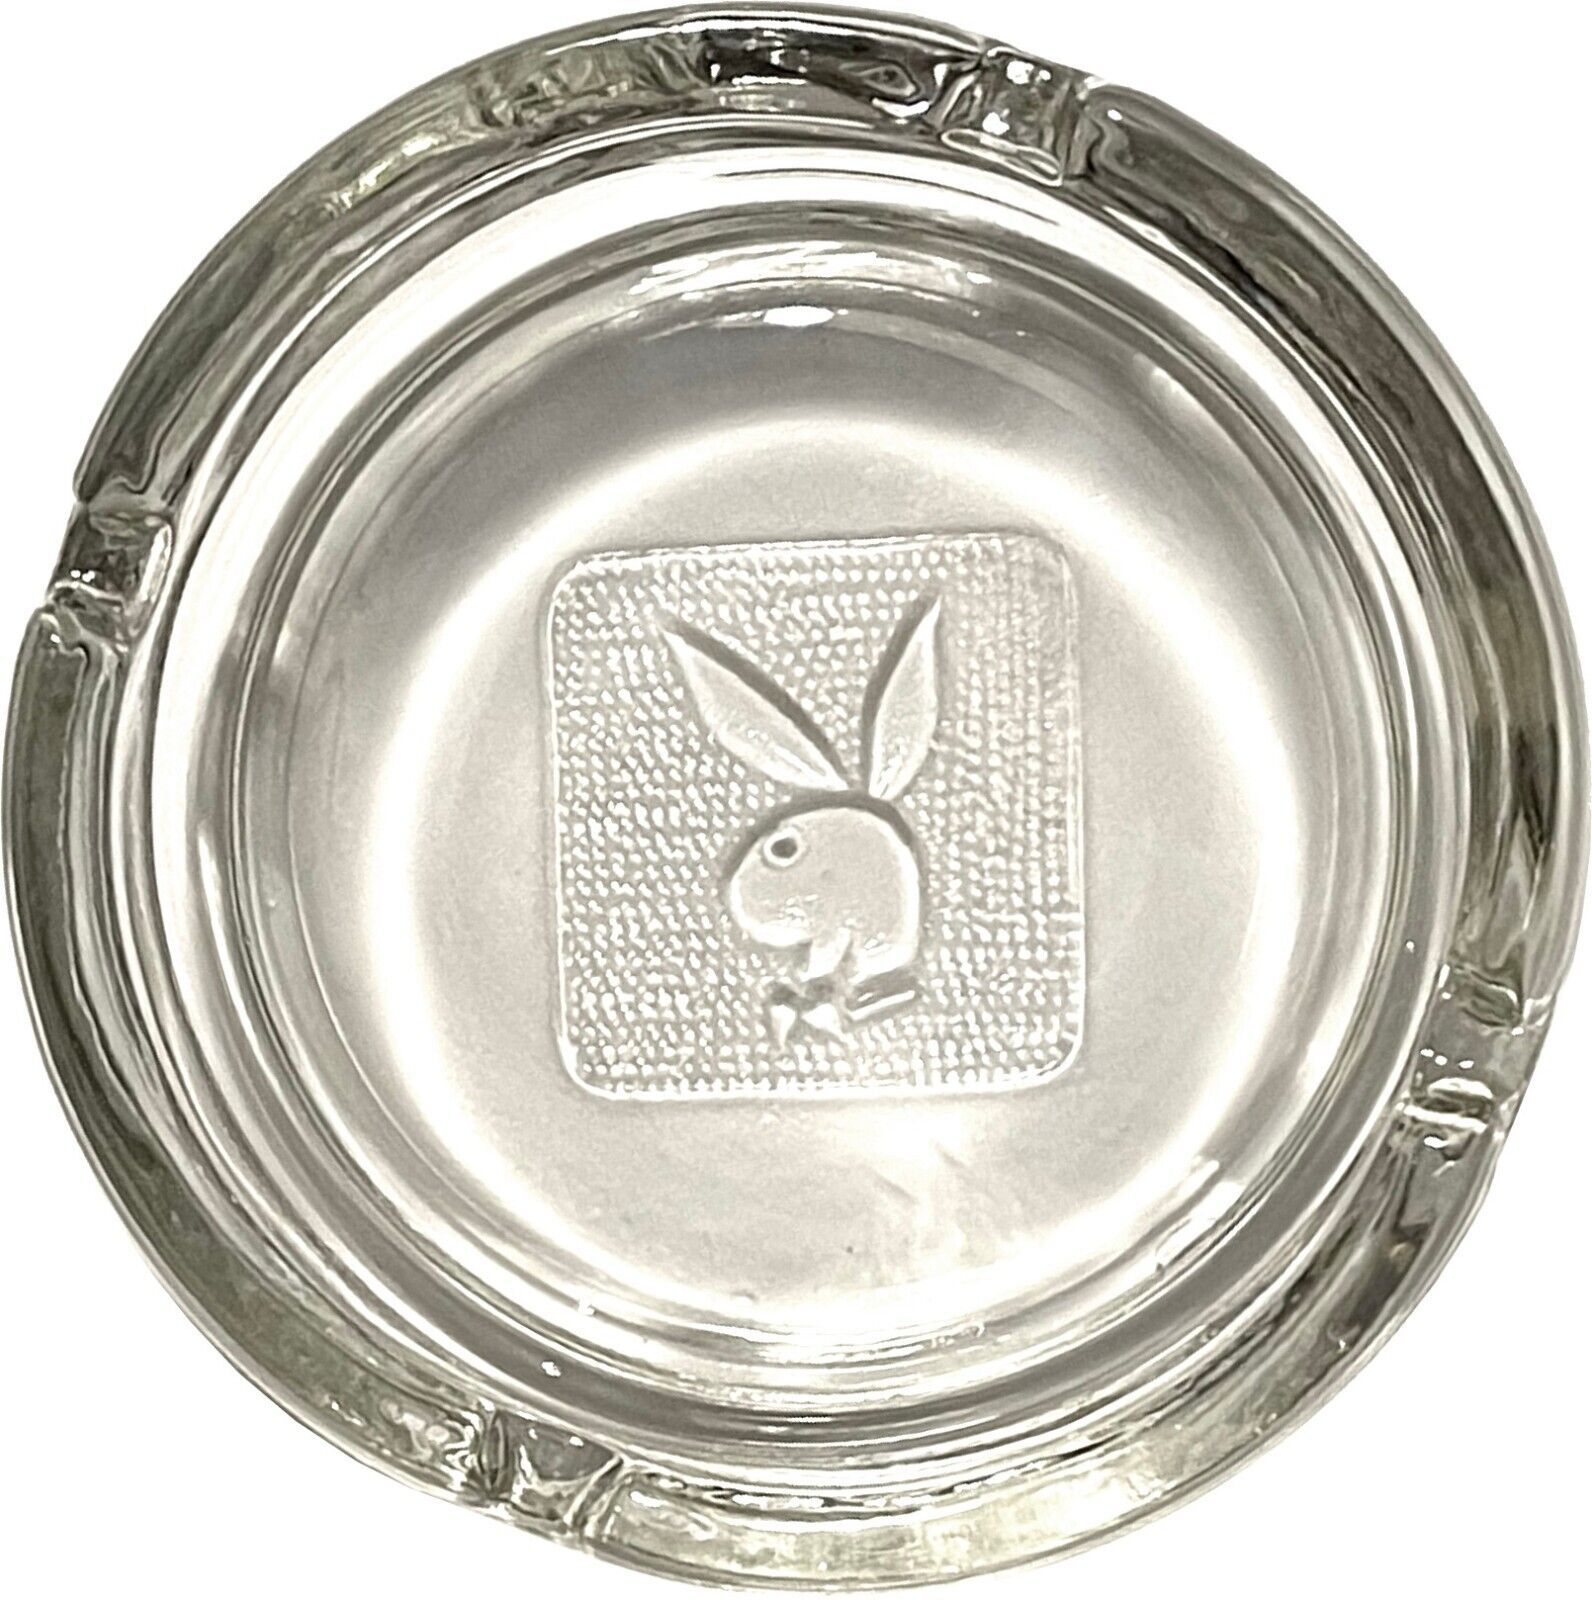 Vintage Playboy Club Clear Glass Ashtray With Embossed Bunny Logo 4" Round  - $29.99